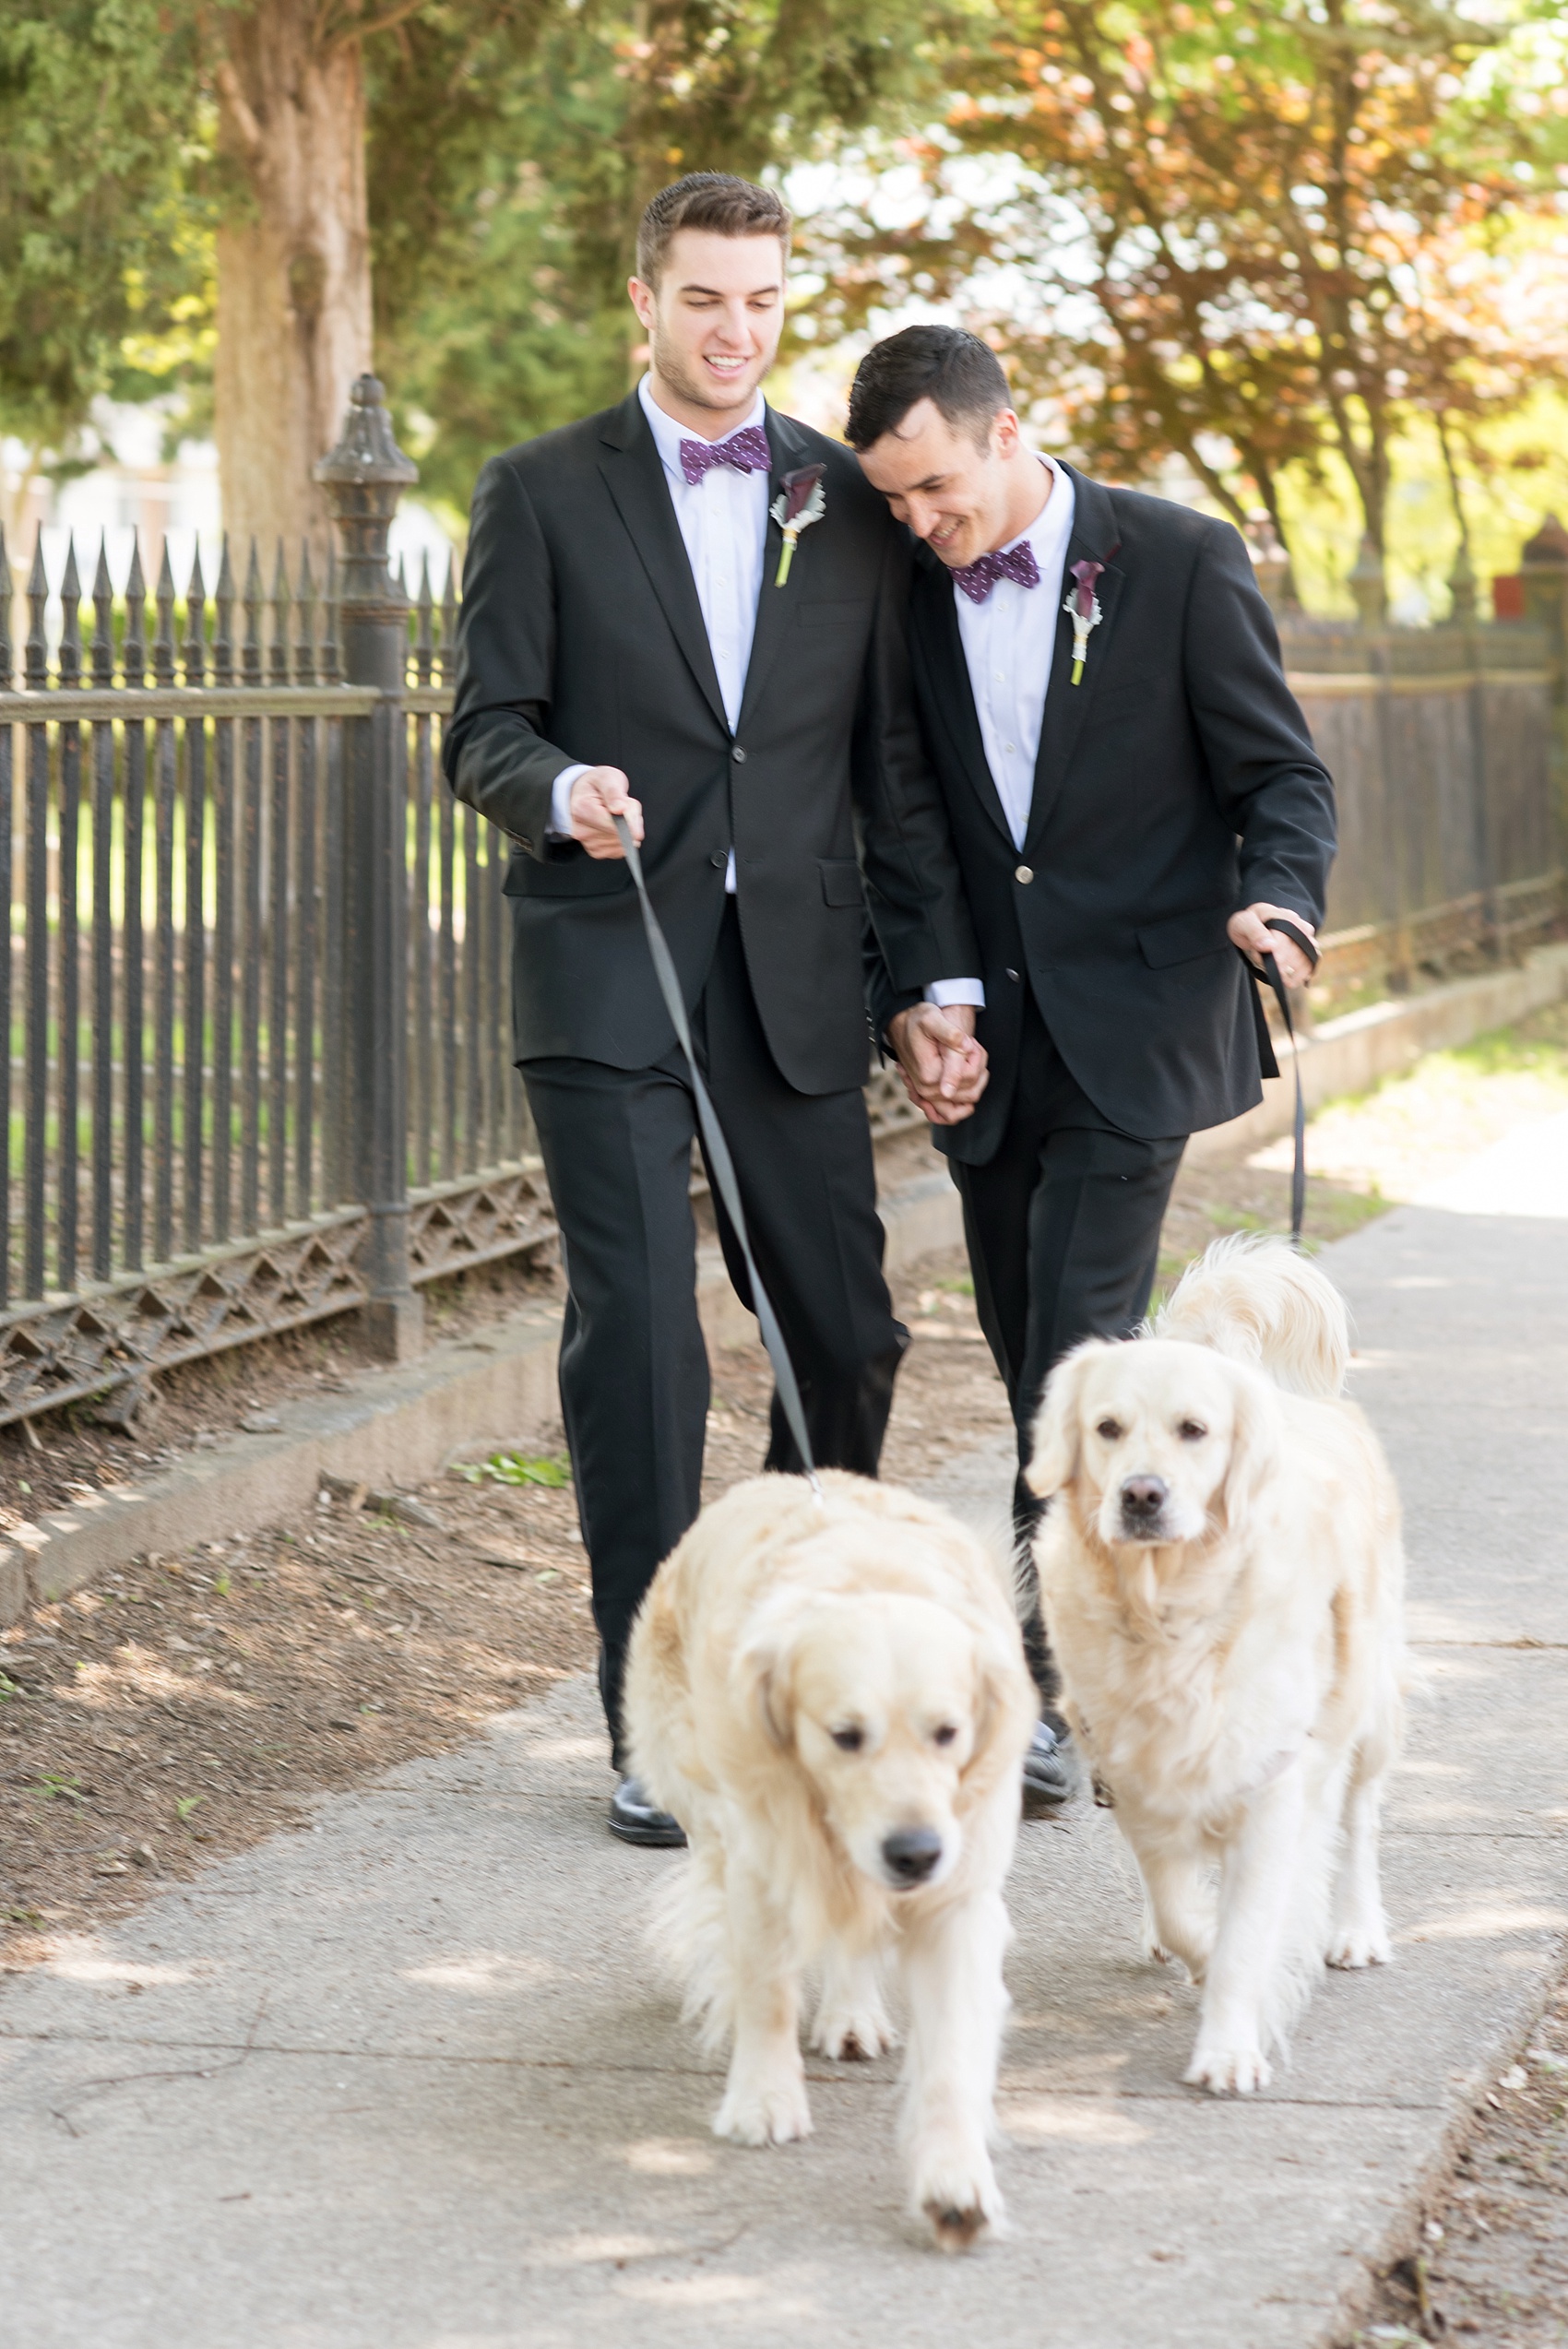 Mikkel Paige Photography pictures of a Raleigh, NC wedding at All Saints Chapel. Gay inspiration with two grooms and their golden retriever dogs.